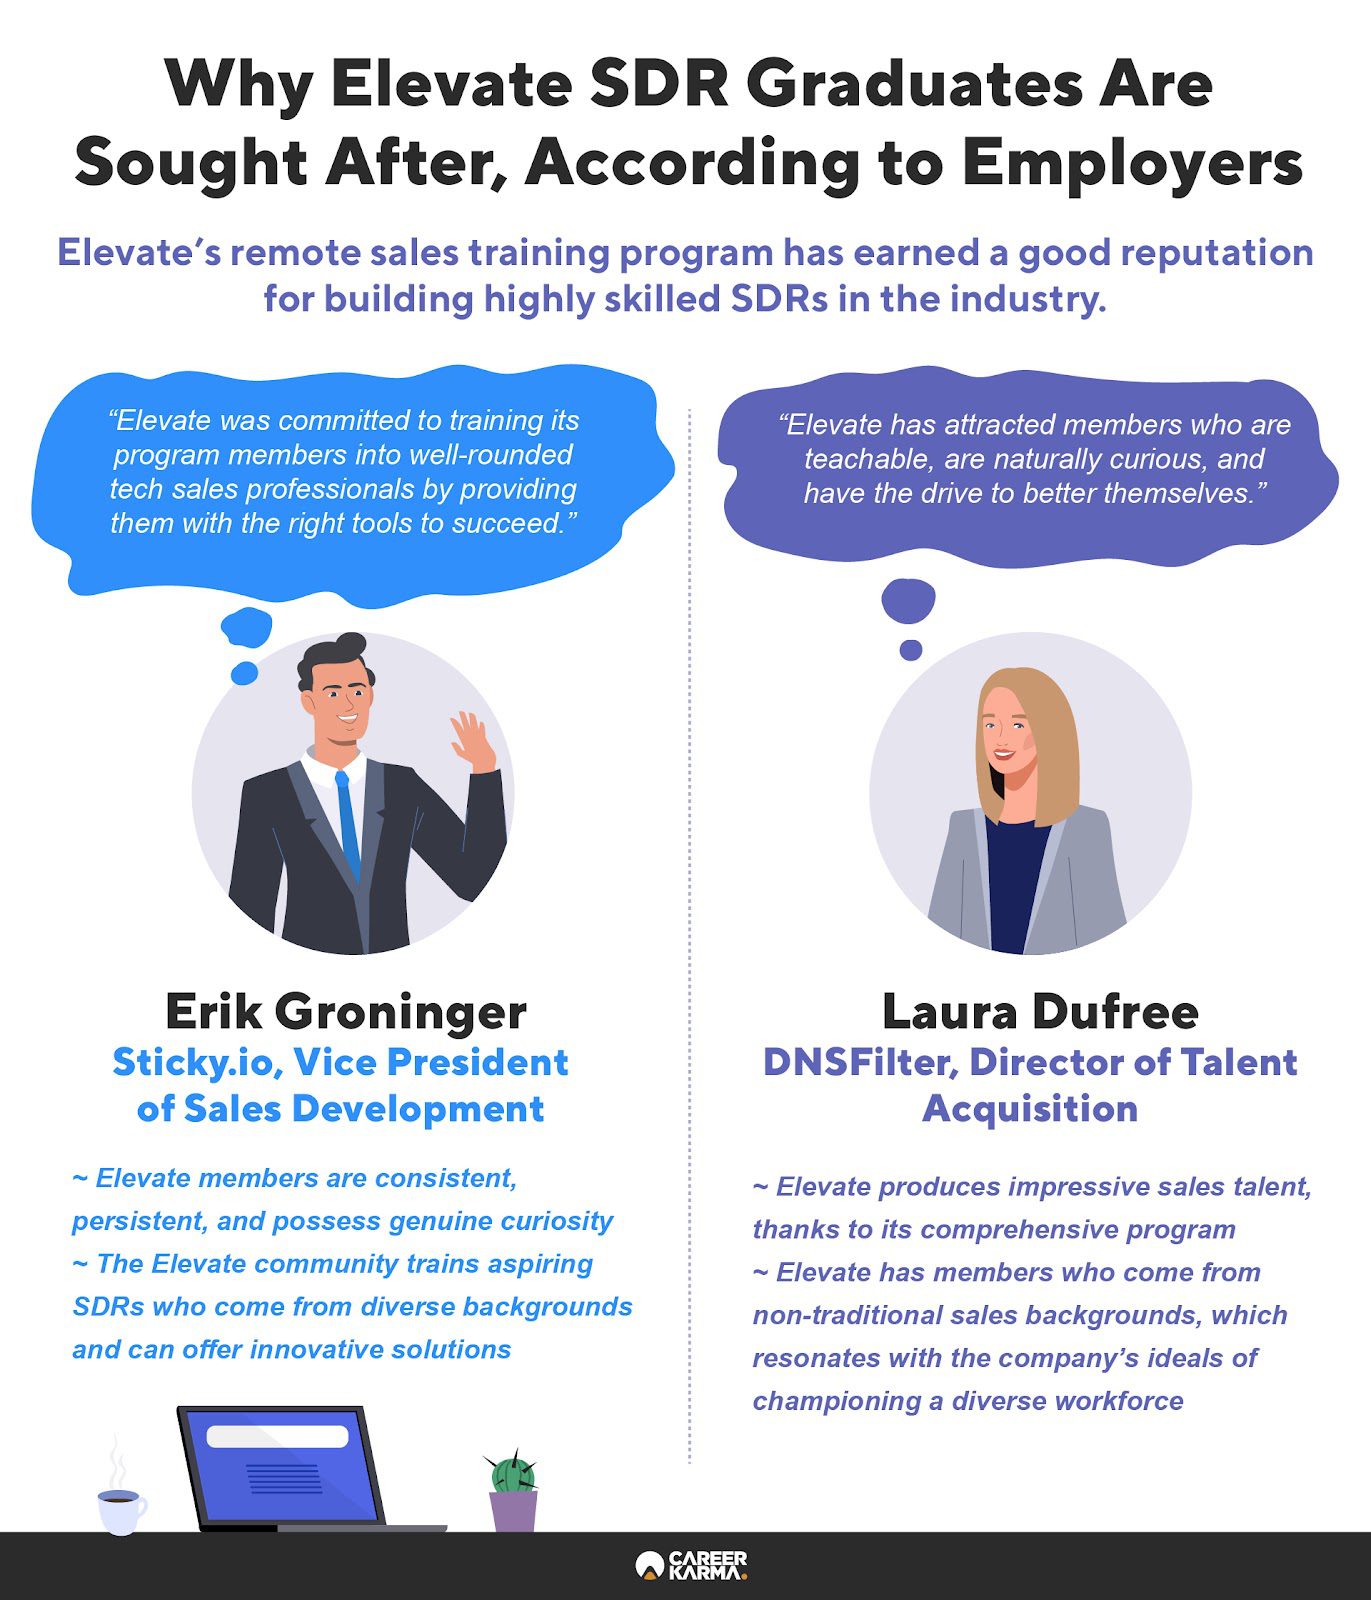 An infographic featuring employers’ reviews of Elevate members